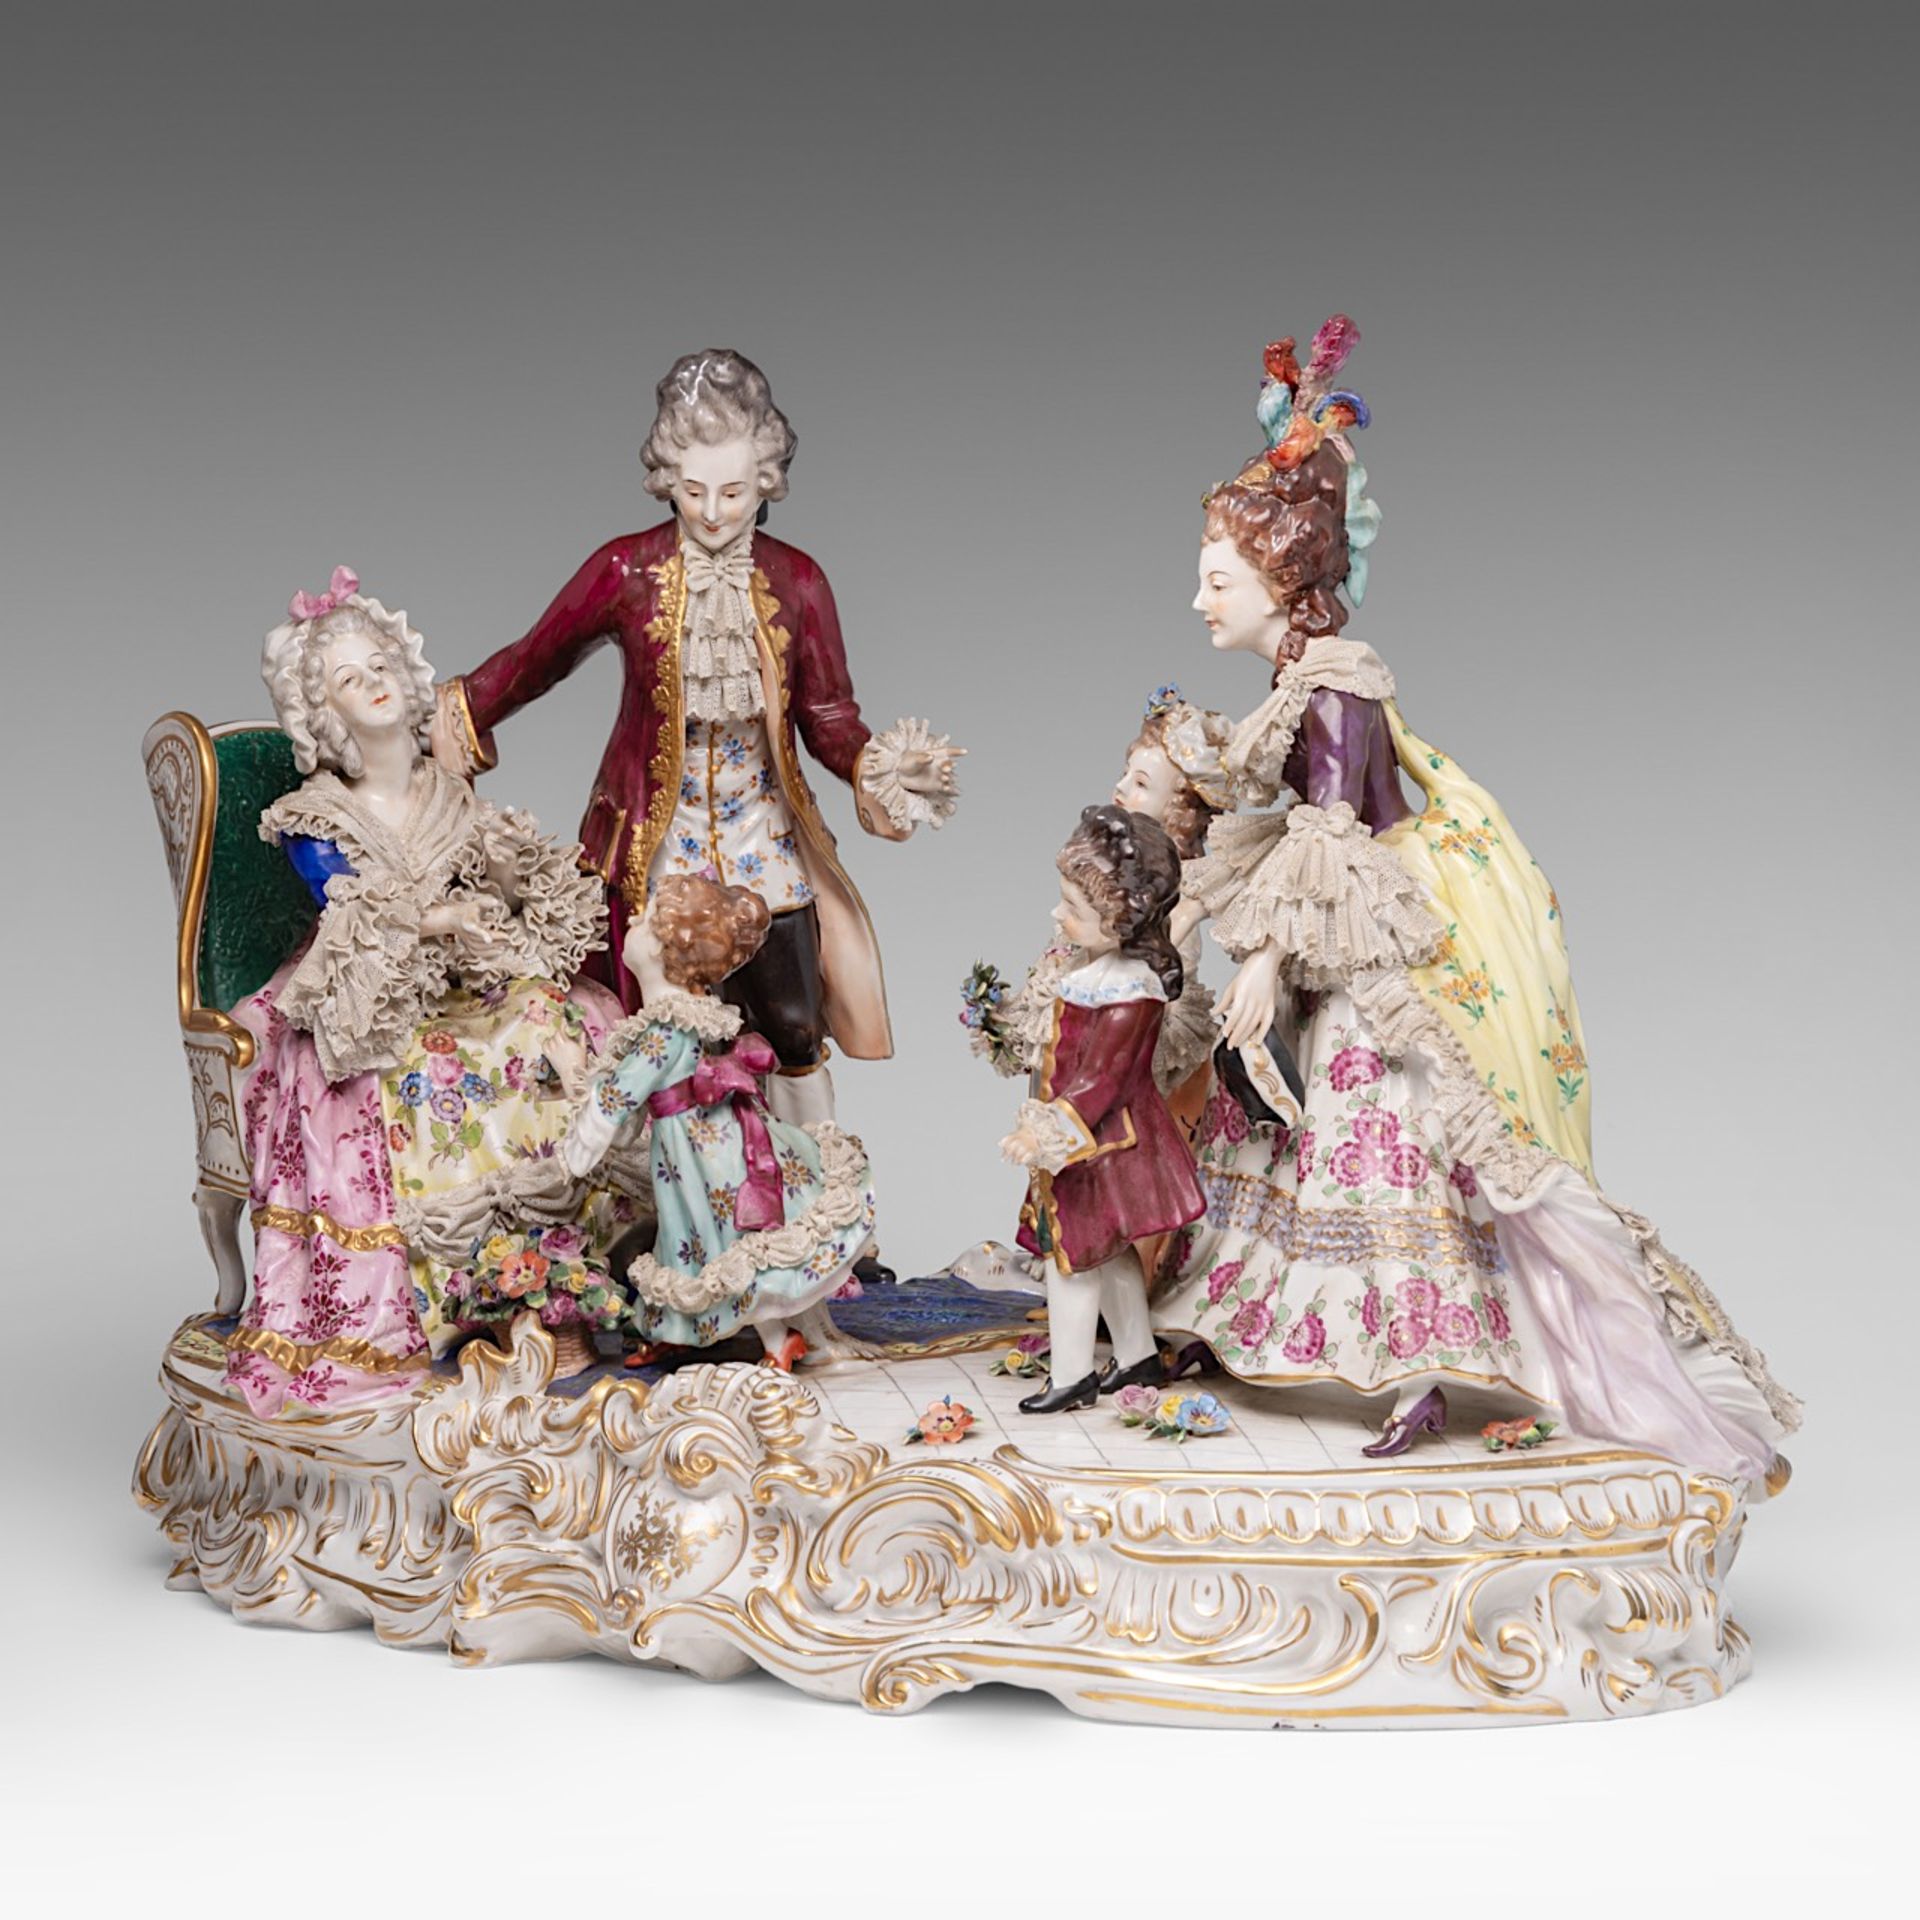 A large Saxony polychrome porcelain group depicting a gallant scene in a Rococo setting, H 40 - W 55 - Bild 2 aus 15